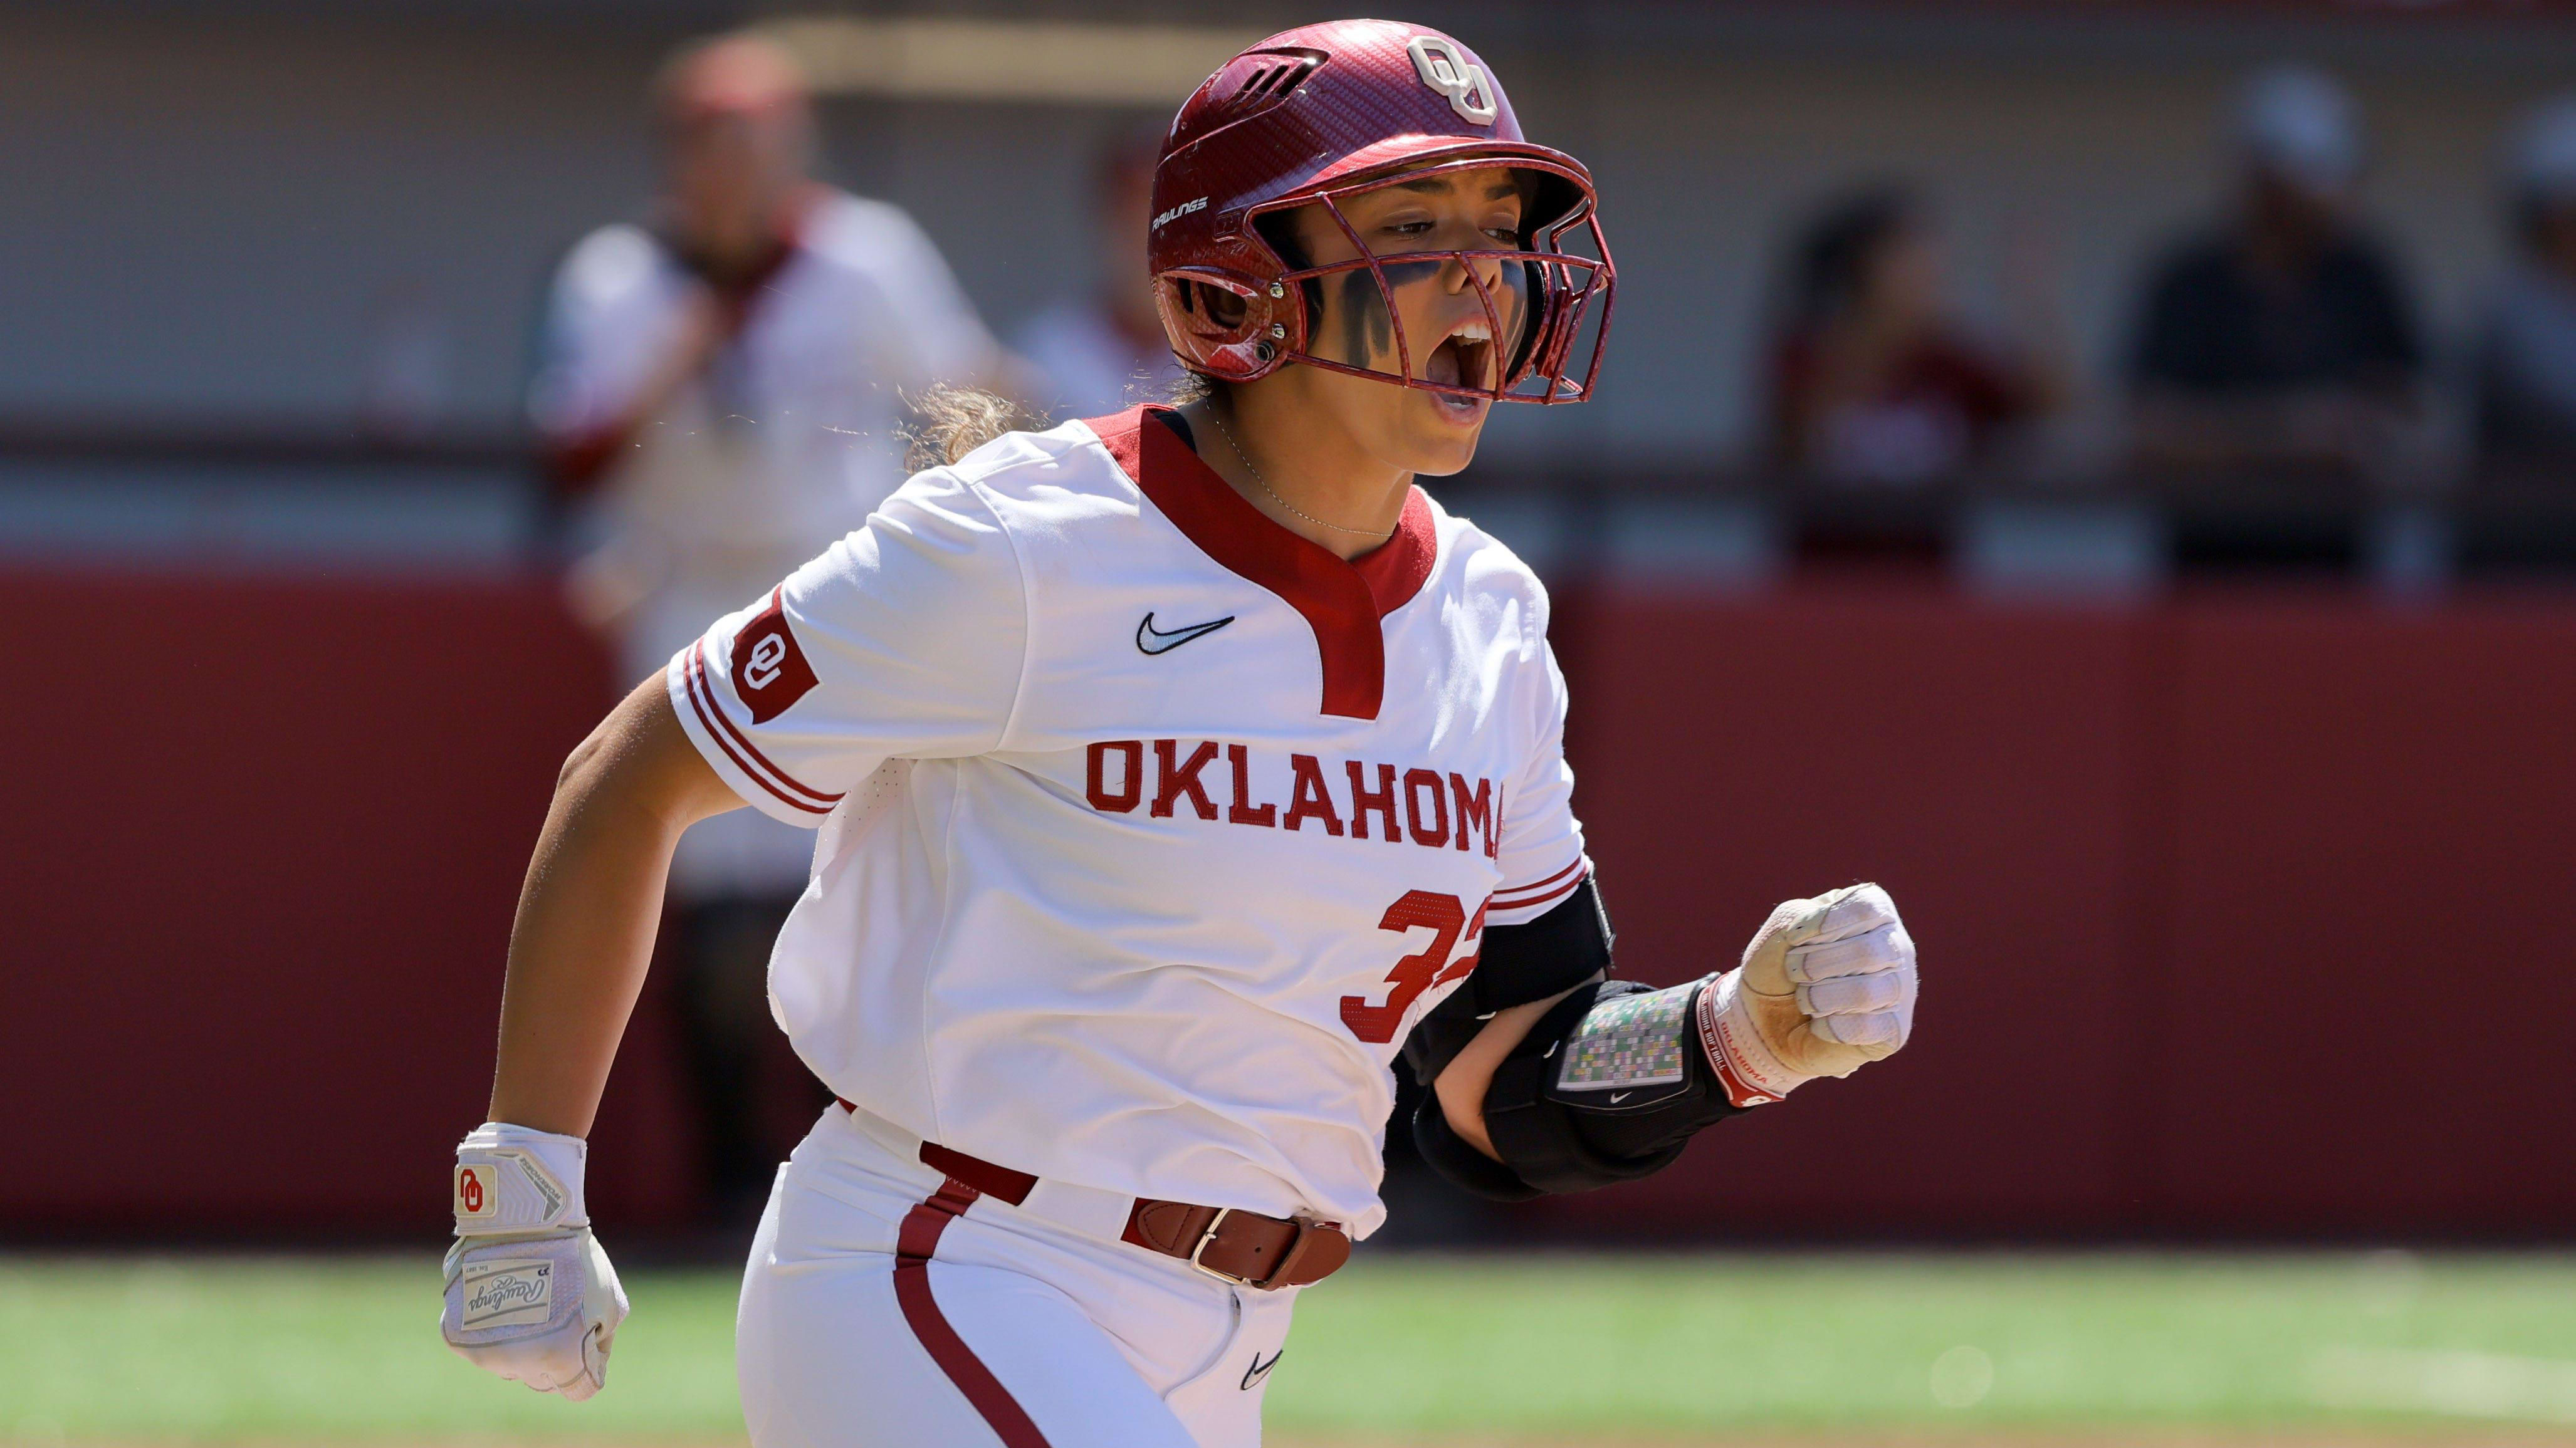 OU Softball: No. 2 OU Prepares for Houston Challenge at Love’s Field